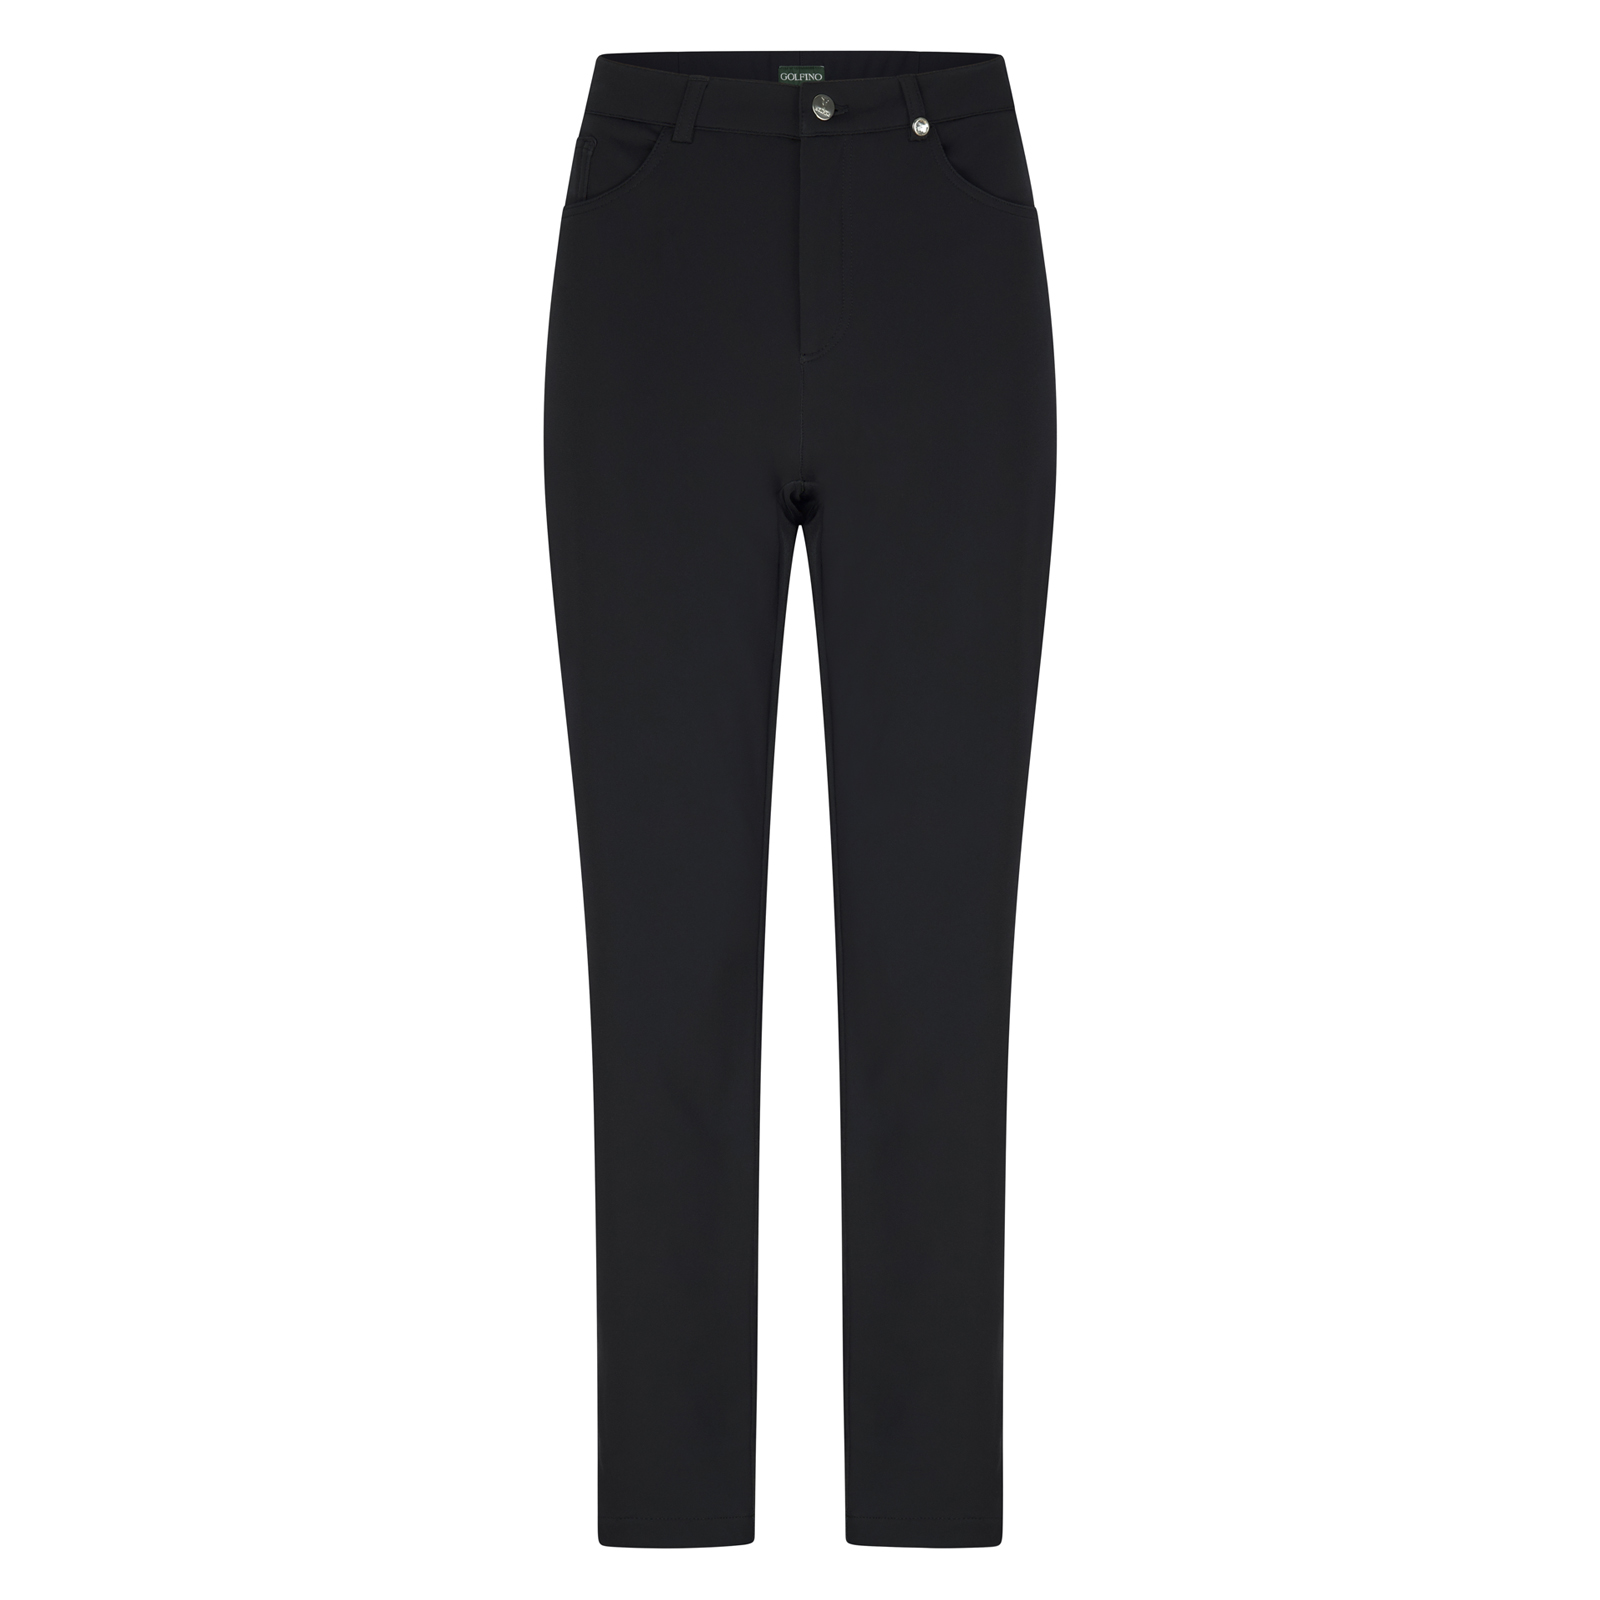 Ladies' comfortable 7/8-length golf trousers in 5-pocket style with crystal logo